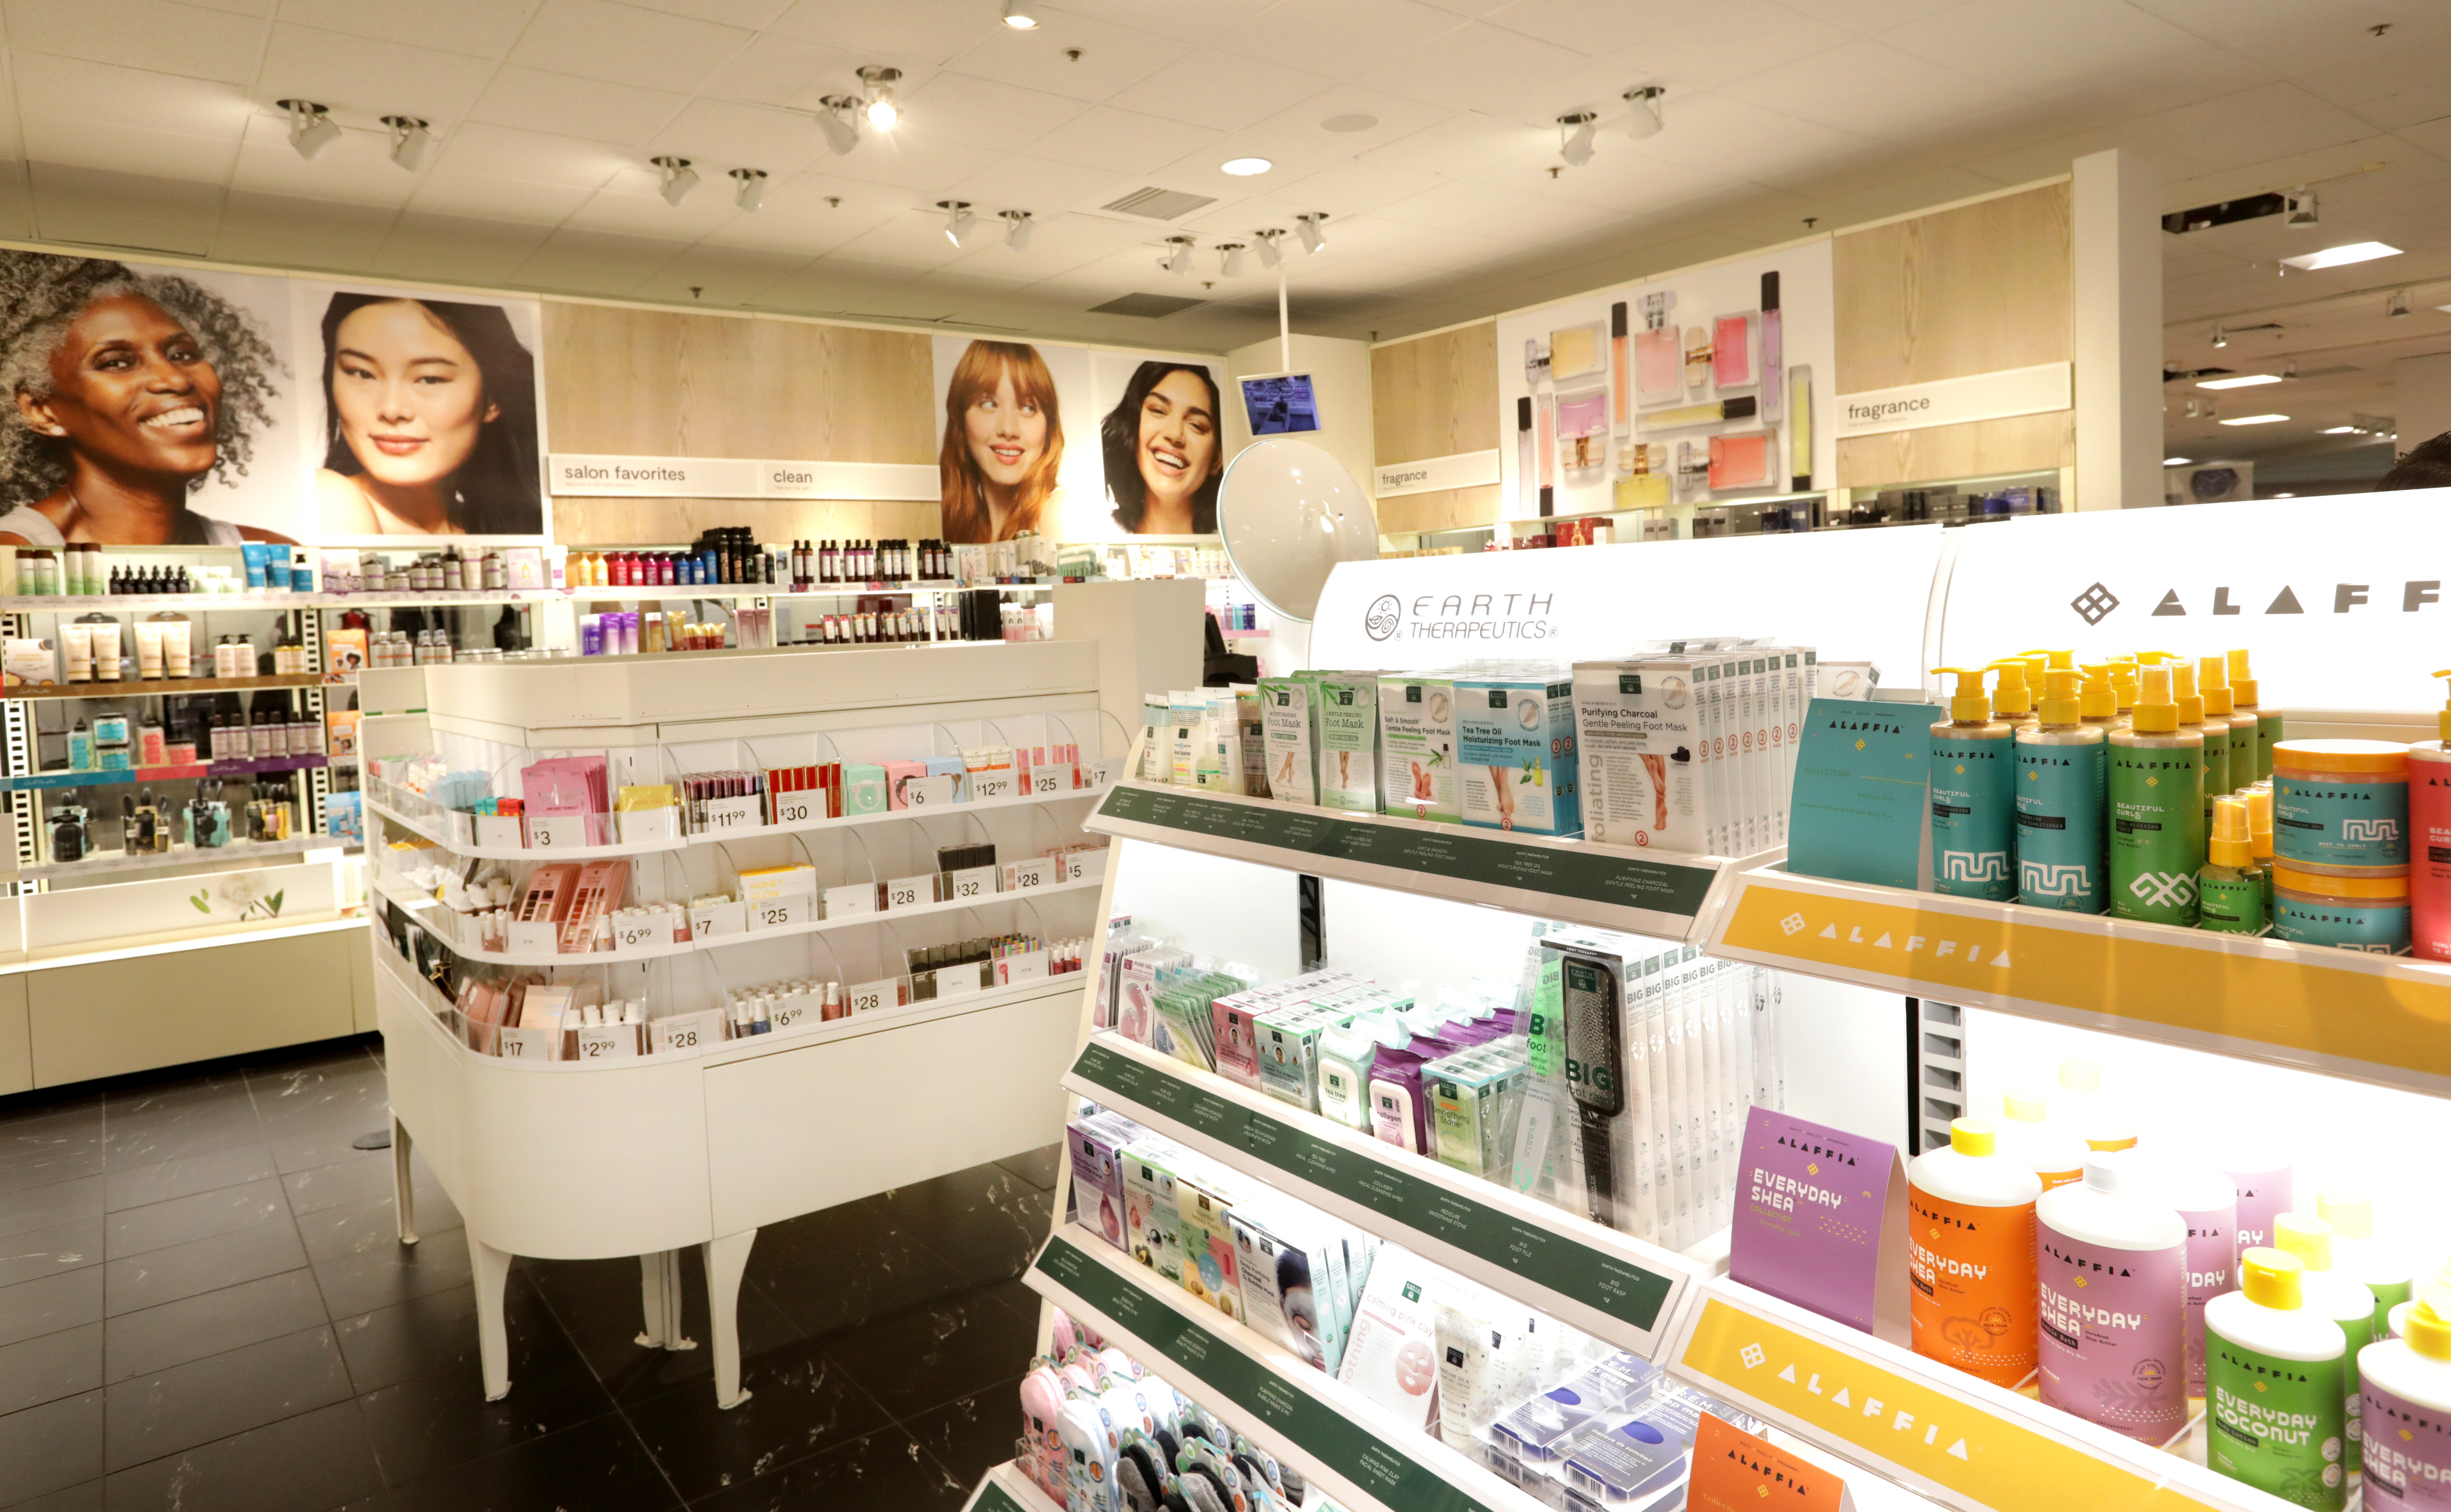 The brands you'll find at the new JCPenney Beauty concept will surprise you